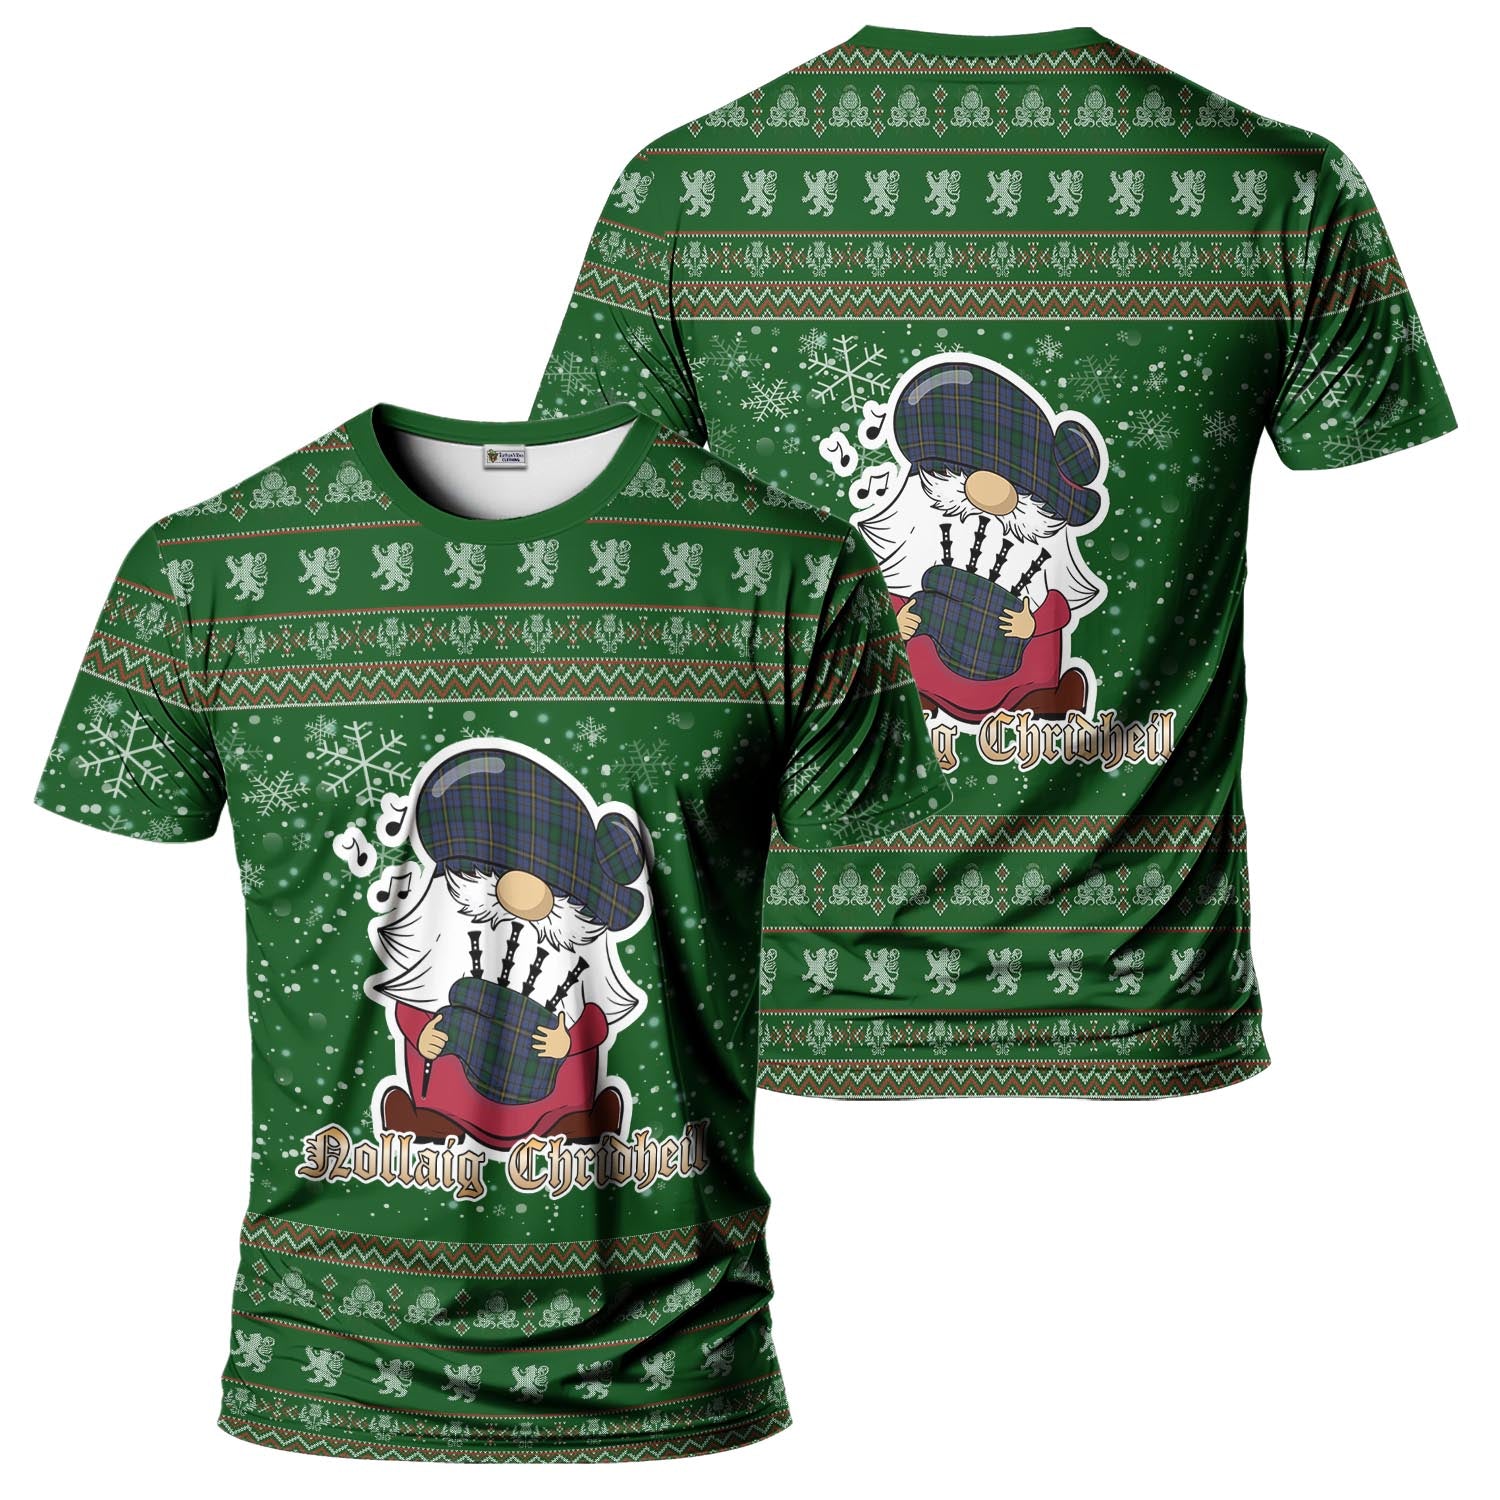 Hope Clan Originaux Clan Christmas Family T-Shirt with Funny Gnome Playing Bagpipes Men's Shirt Green - Tartanvibesclothing